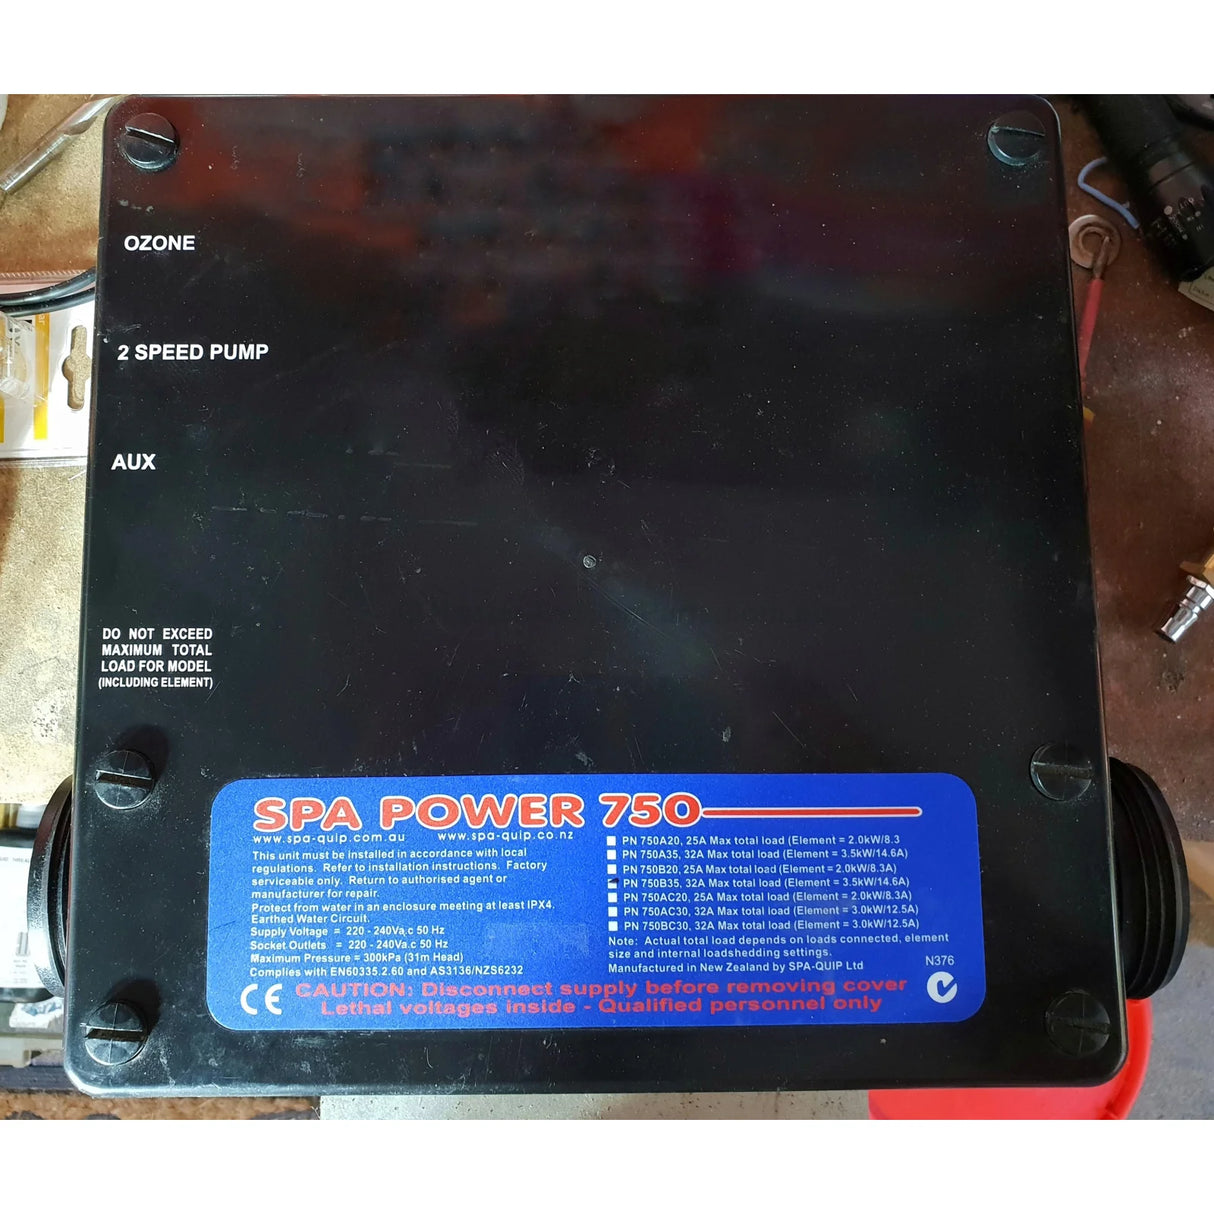 Spa Power SP 750 Spa Control System - Spa-Quip - Repairs and Parts - Heater and Spa Parts